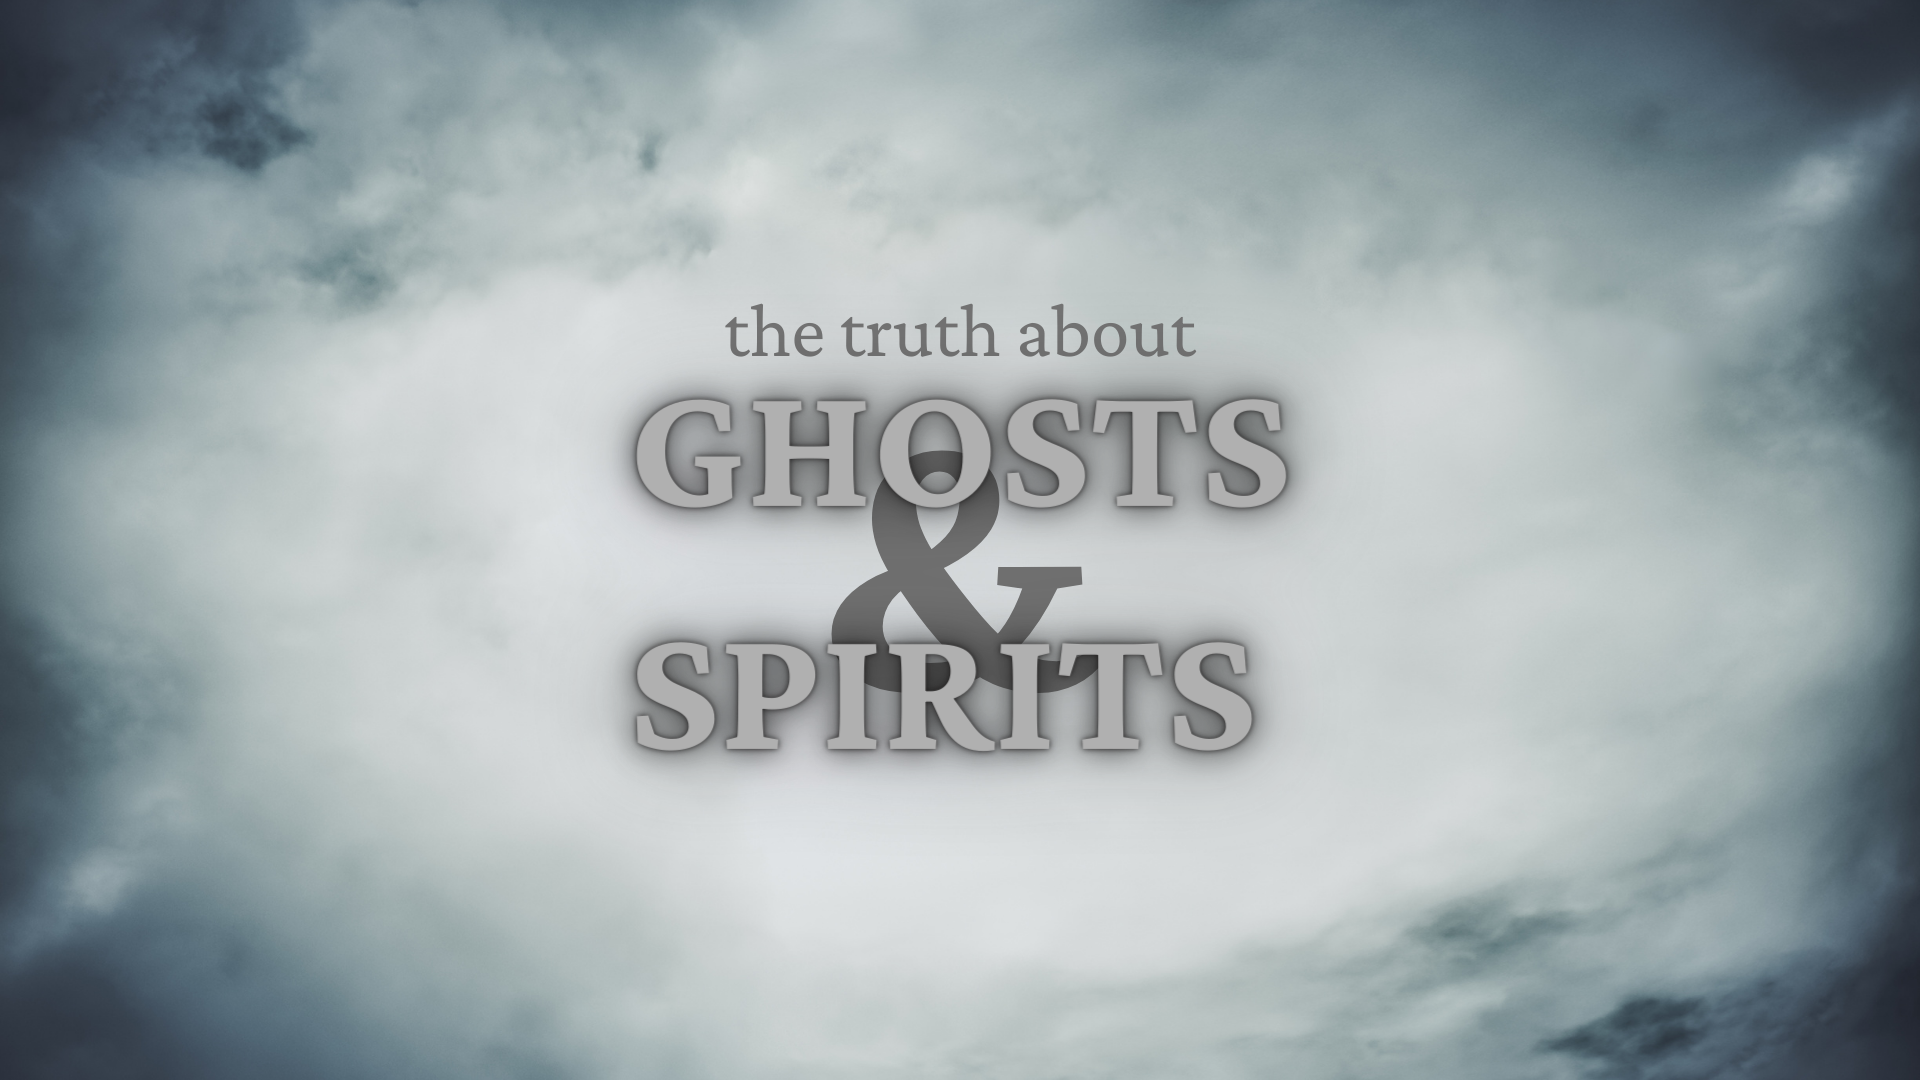 Ghosts & Spirits 2.png